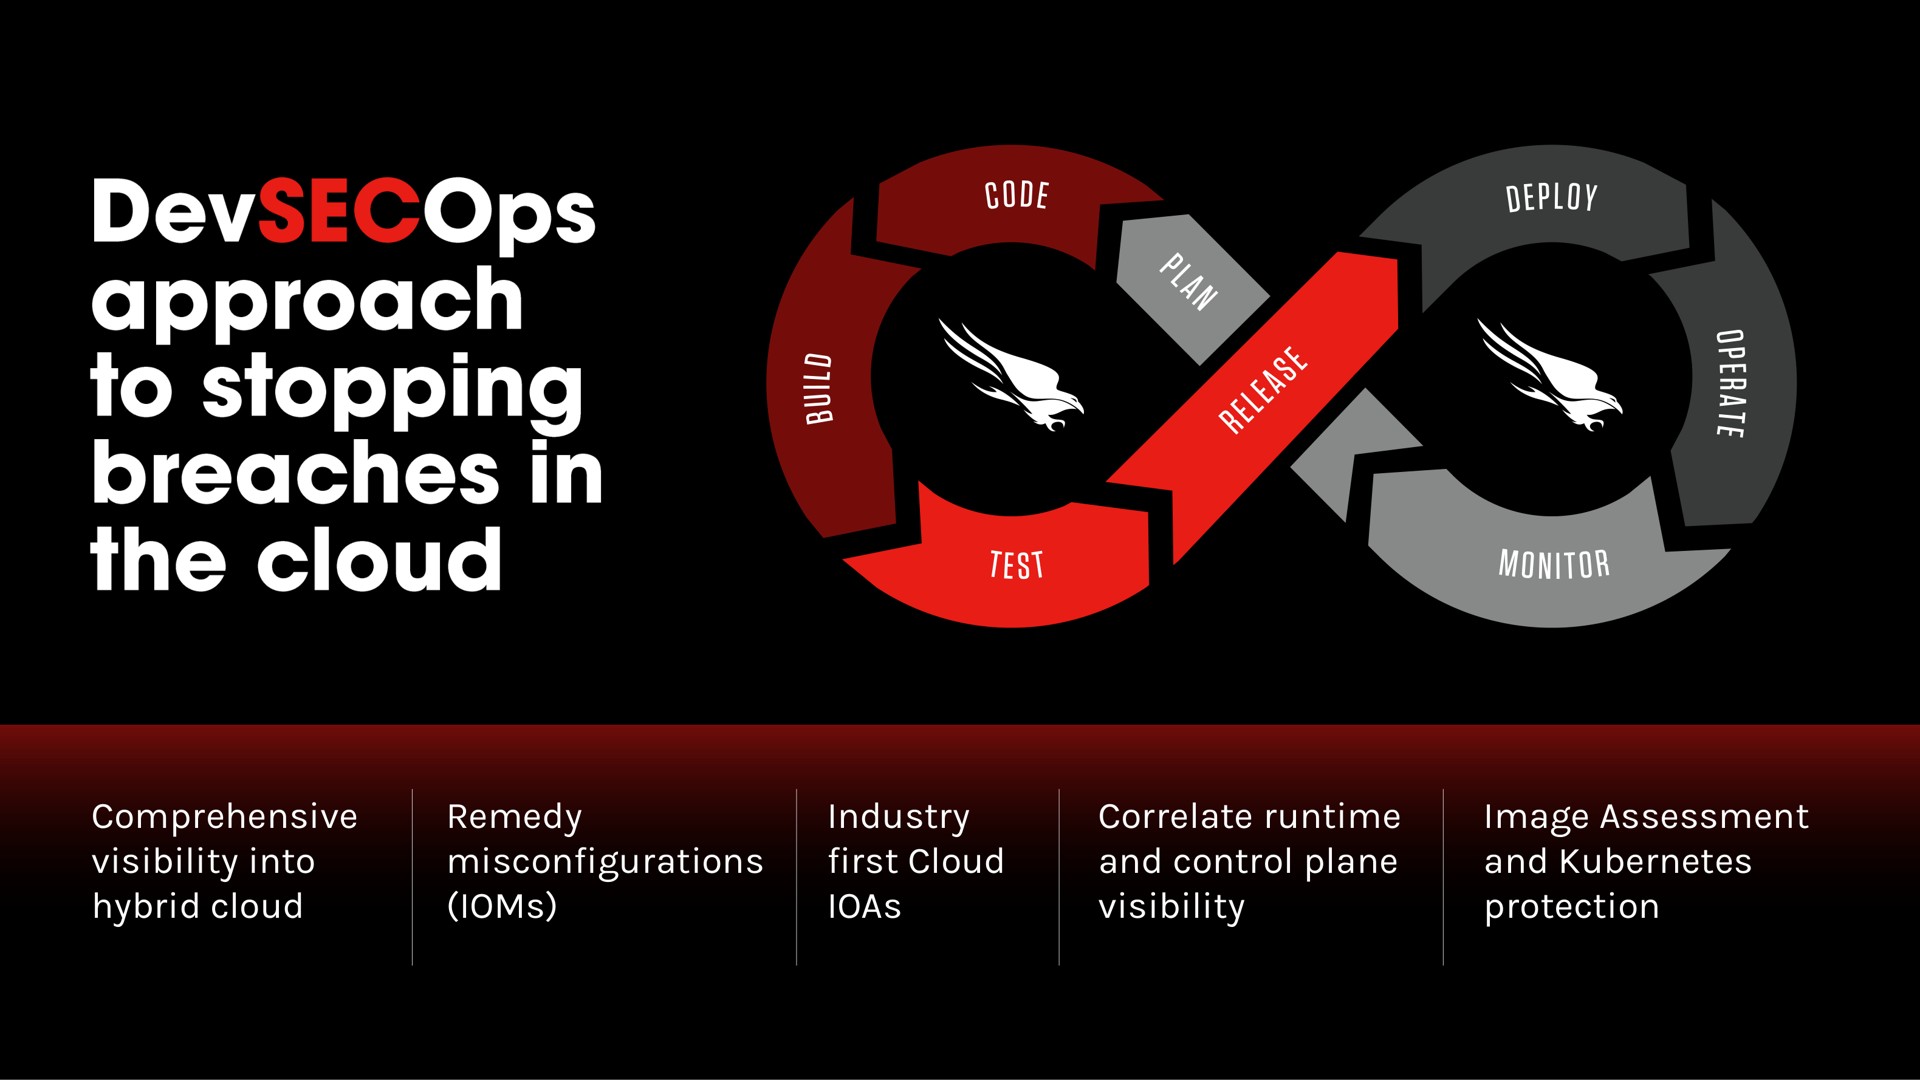 comprehensive visibility into hybrid cloud remedy industry first cloud correlate and control plane visibility image assessment and protection approach to stopping a a breaches in inter a | Crowdstrike